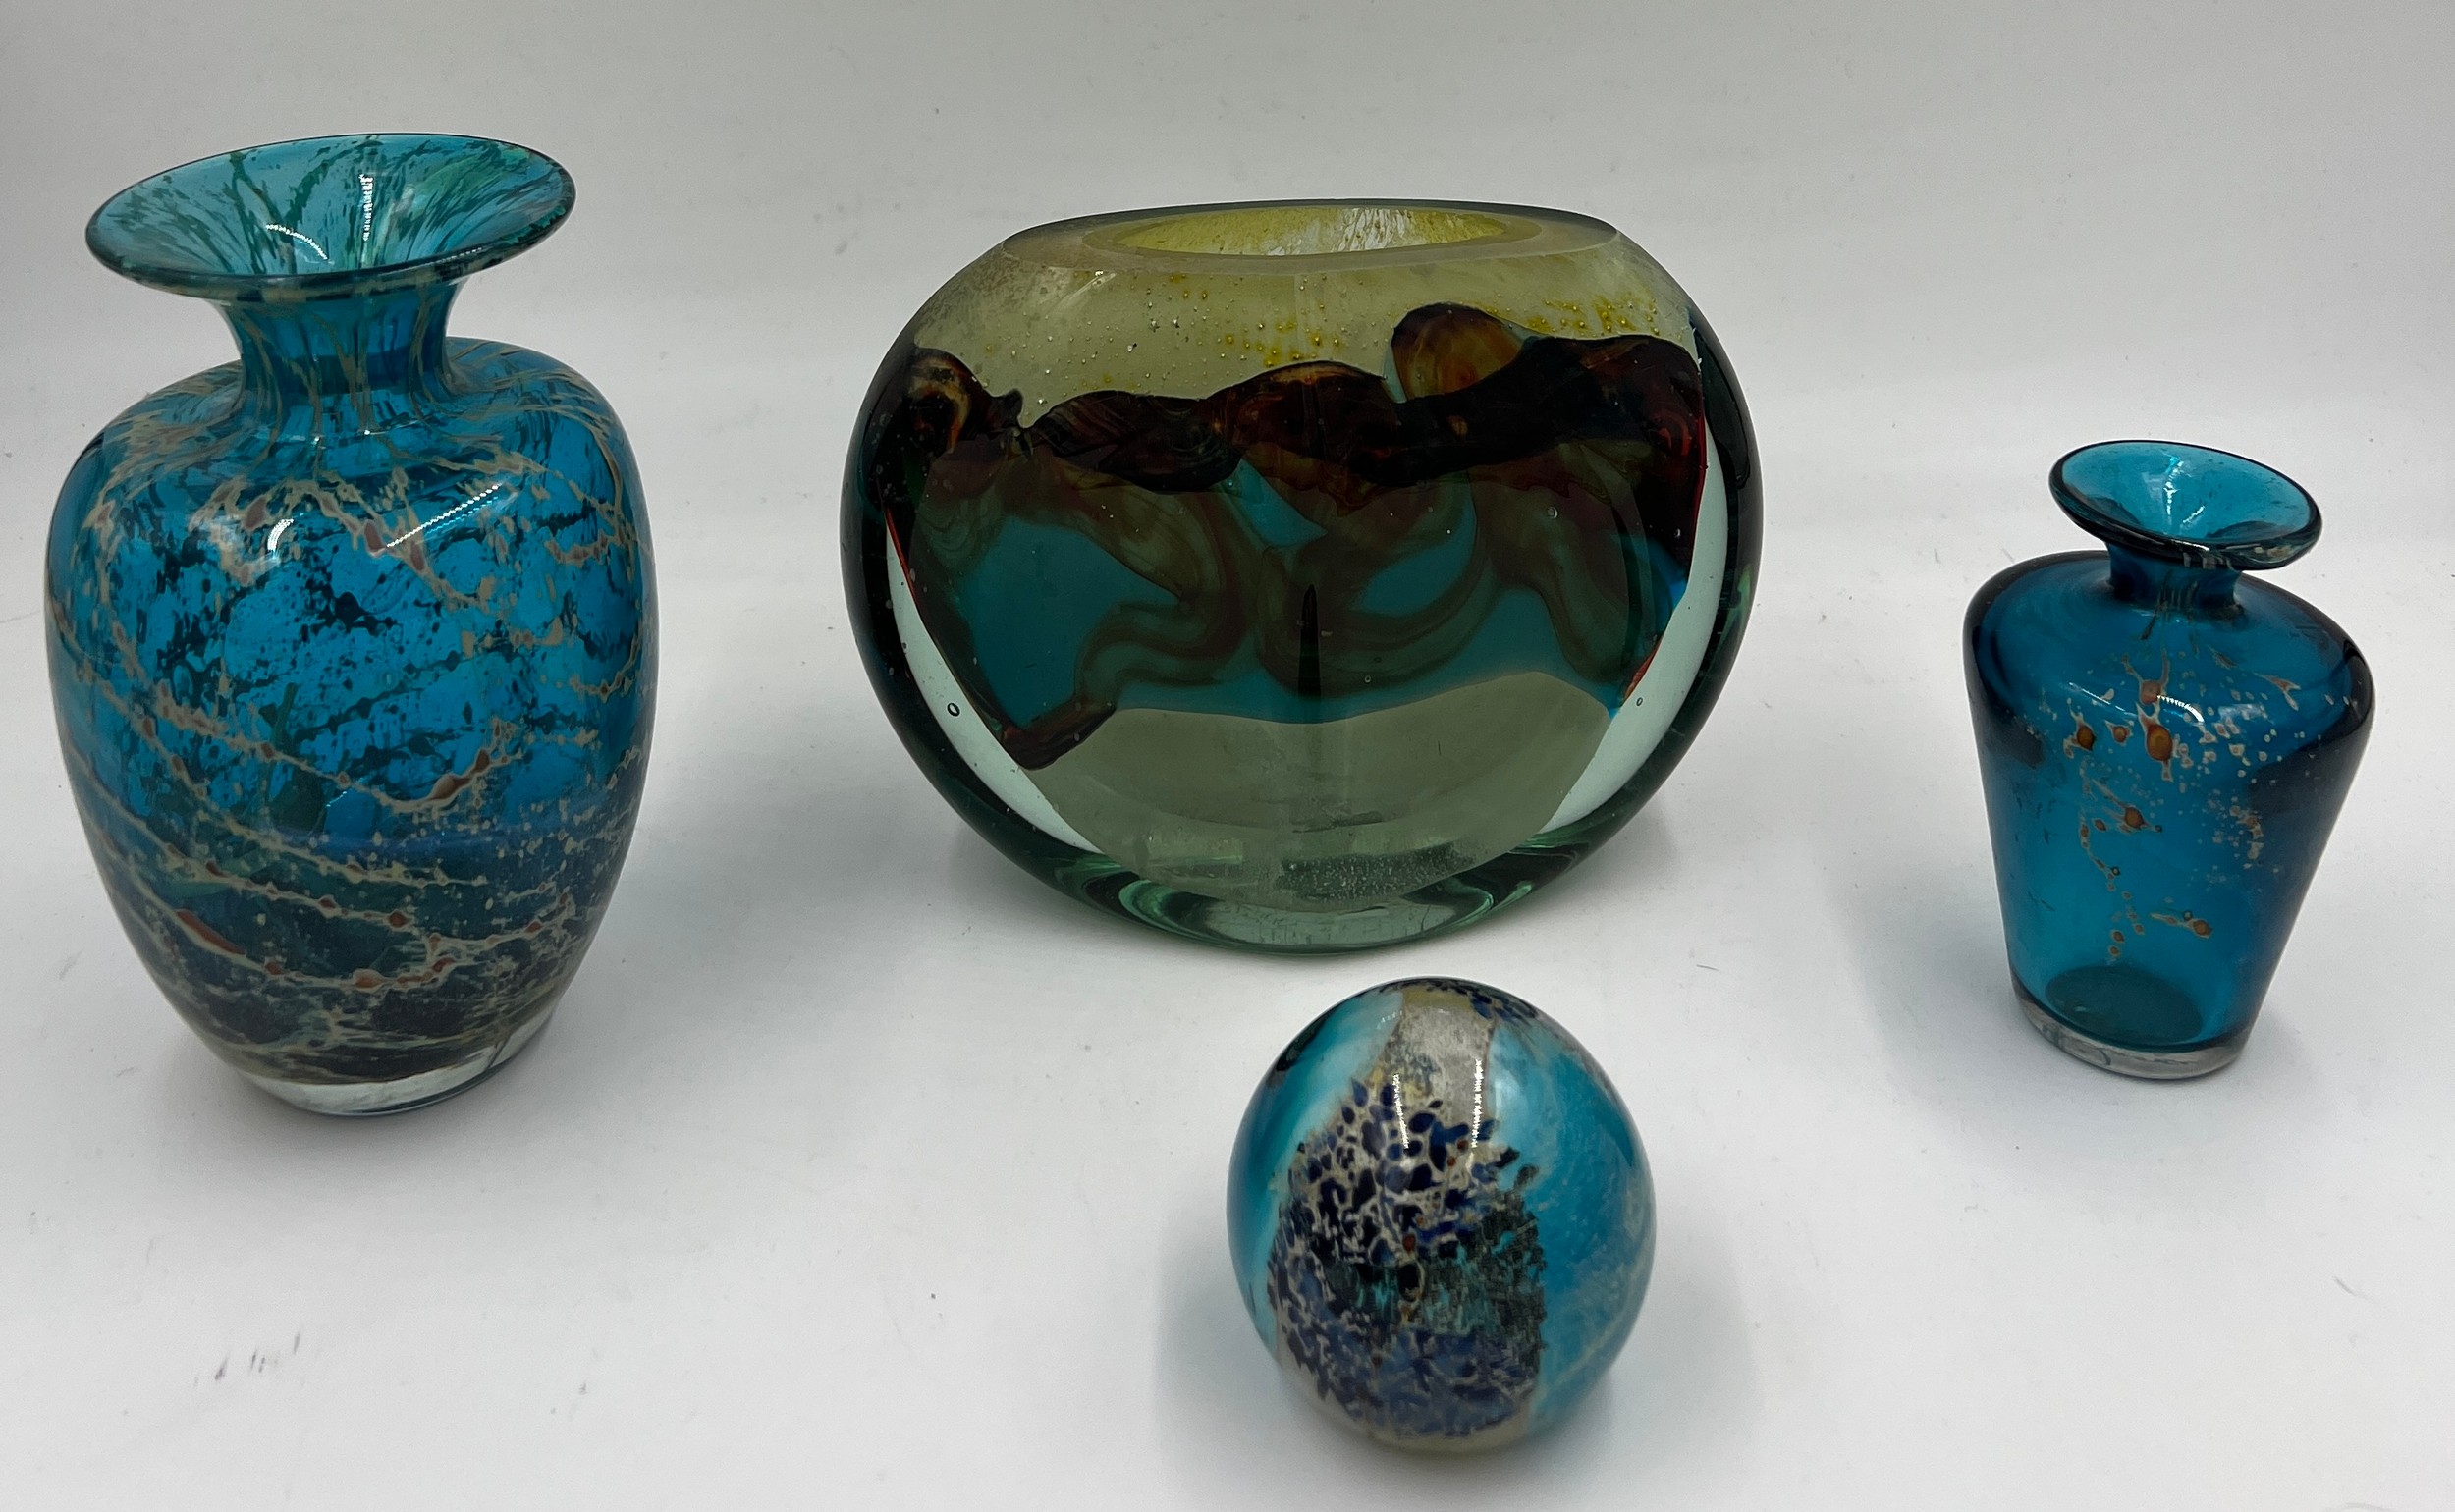 Four pieces of mid 20thC glass, the smaller vase 11cm h marked Mdina.